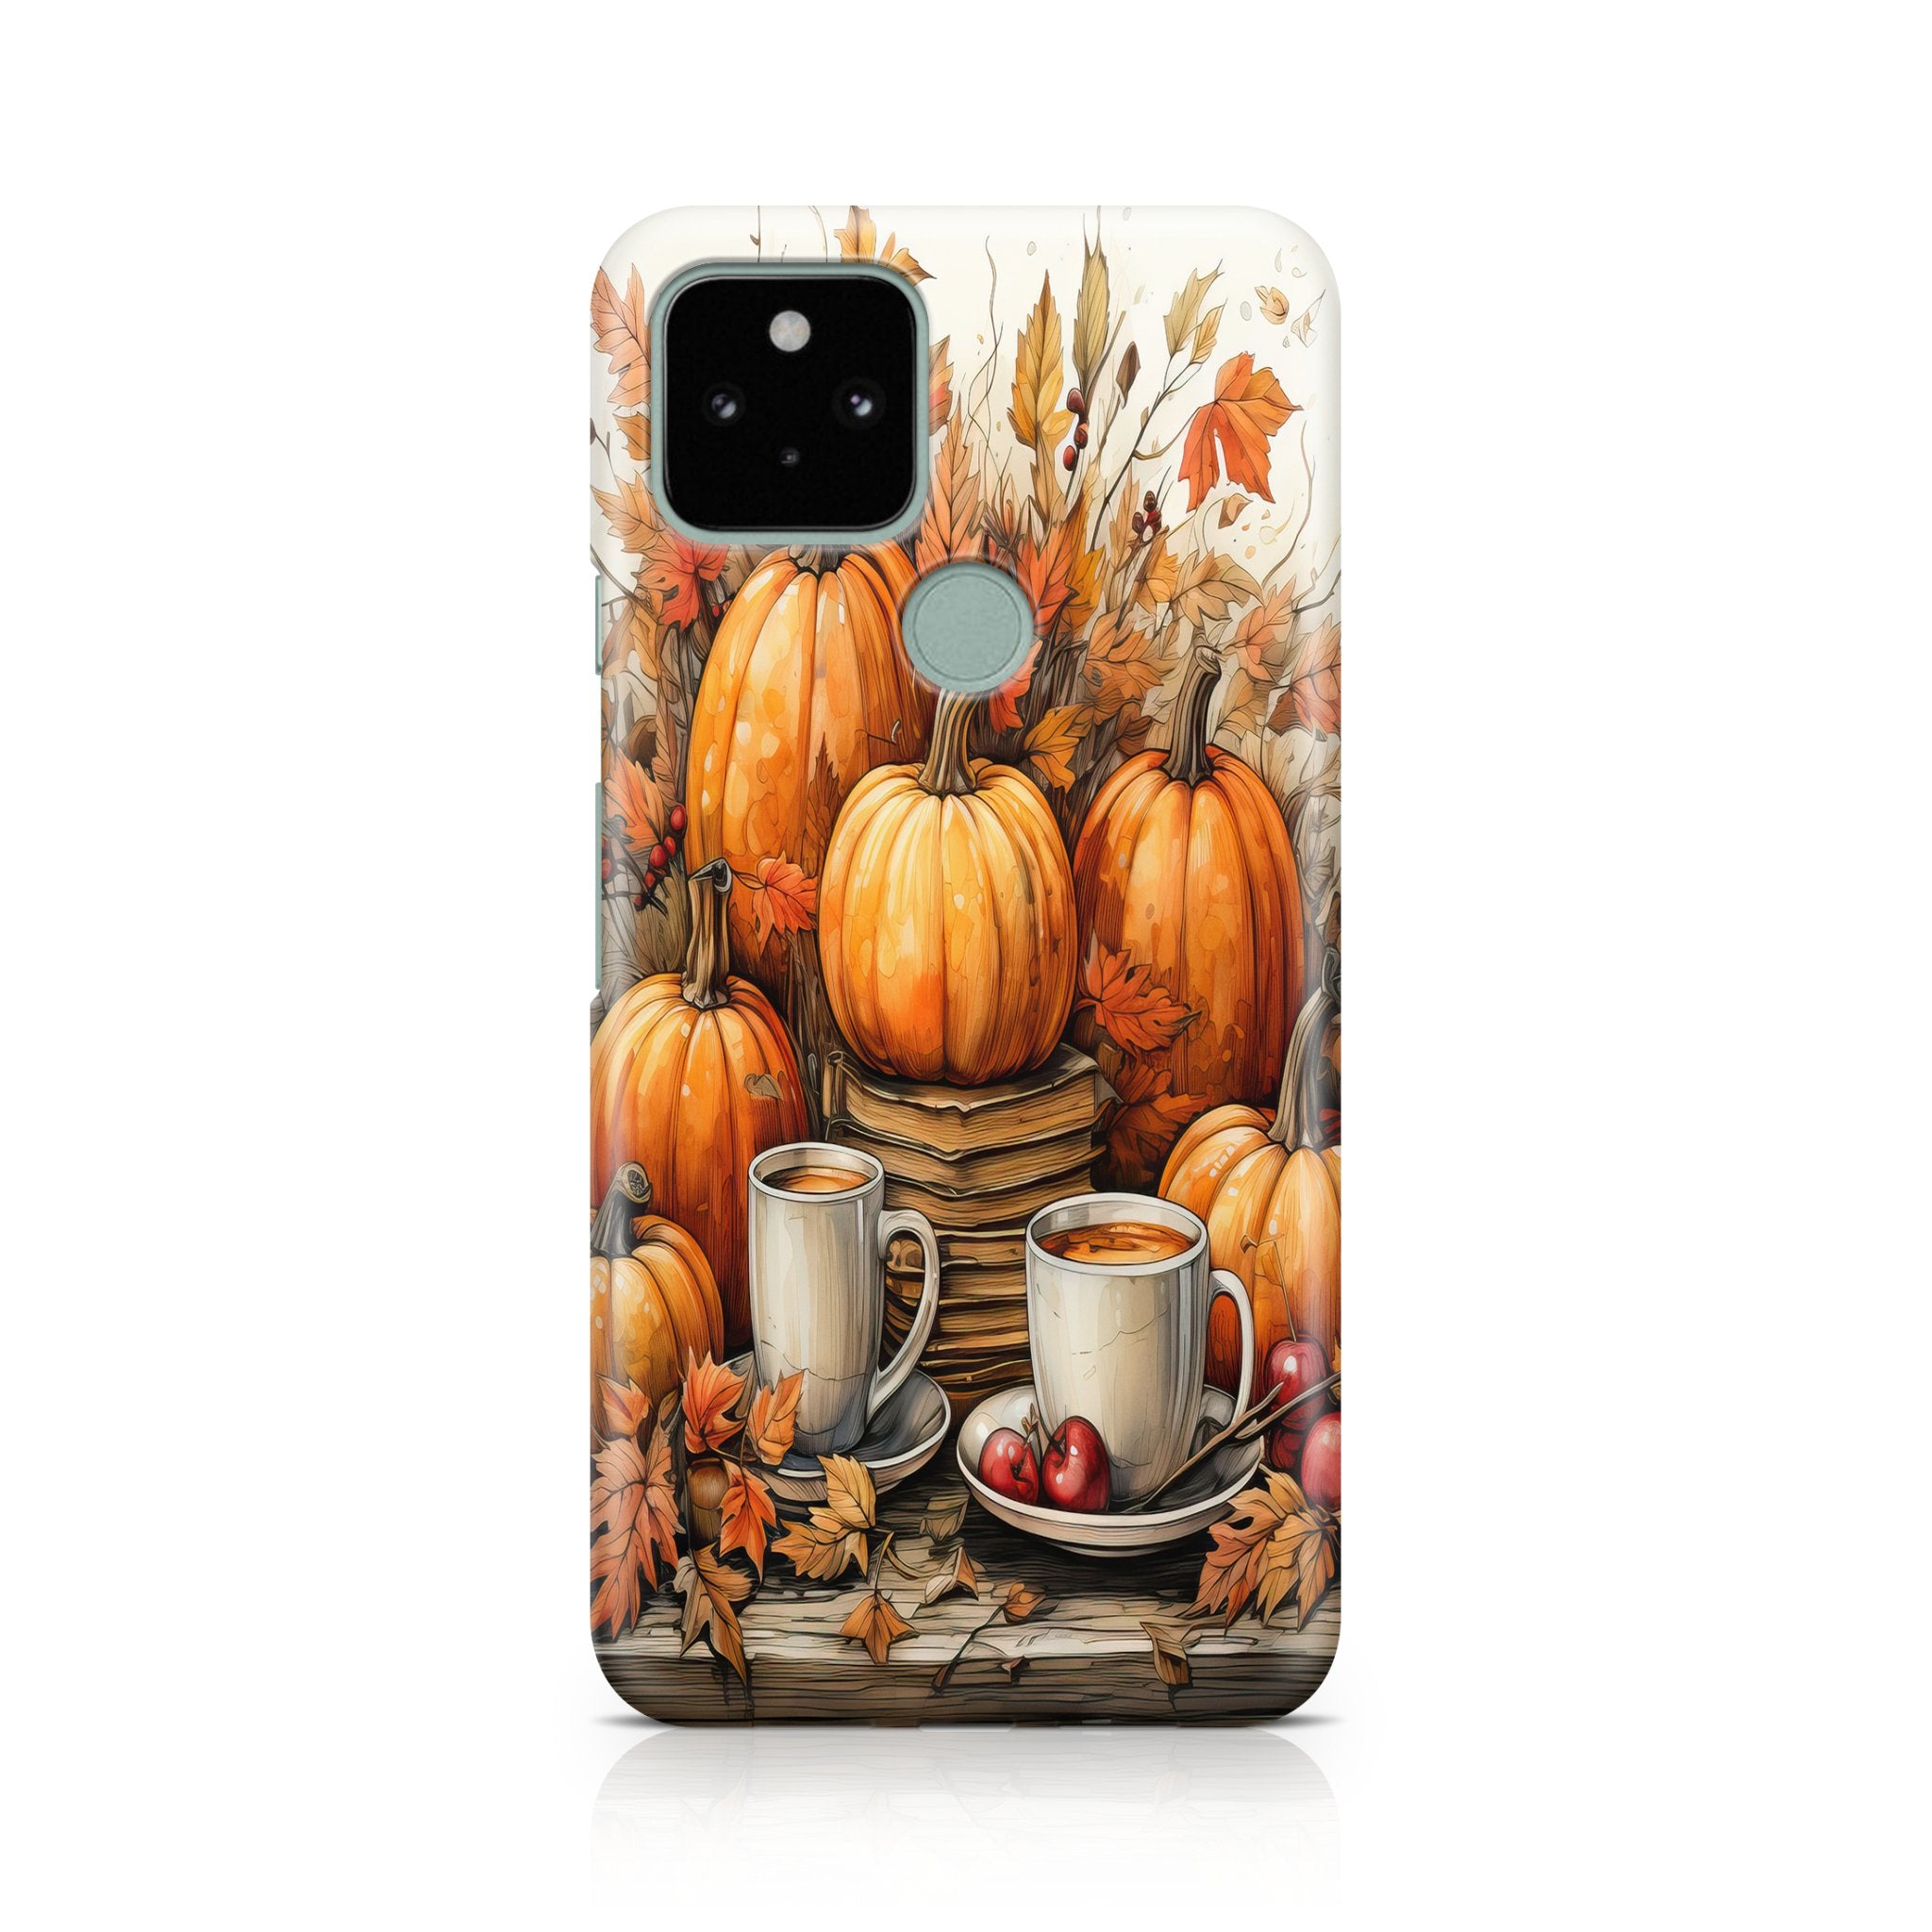 Harvest Pumpkin - Google phone case designs by CaseSwagger